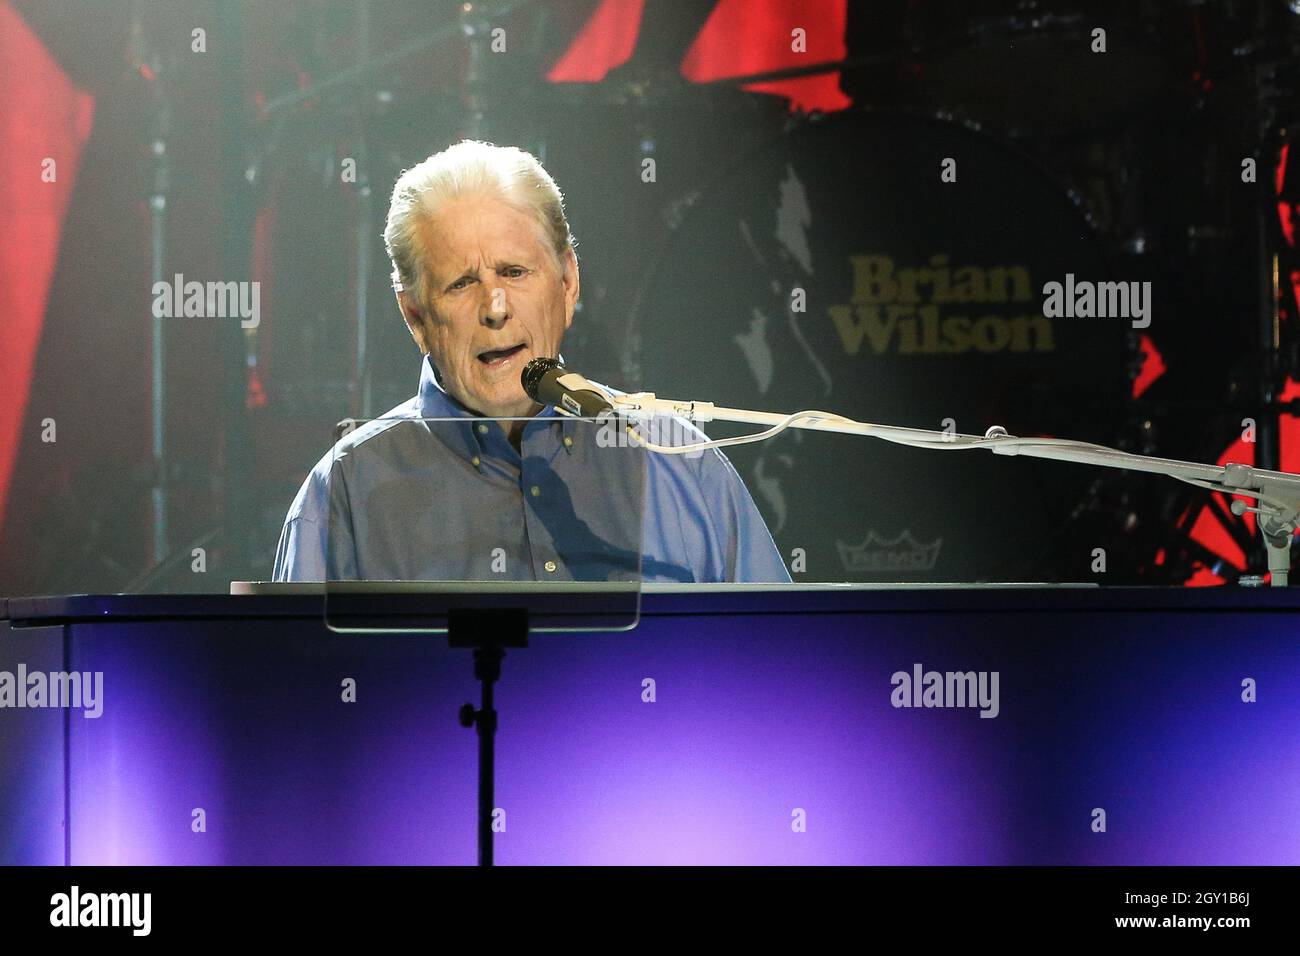 Brian Wilson, co-founder of the Beach Boys, performs in concert at the Paramount on October 5, 2021 in Huntington, New York. Stock Photo